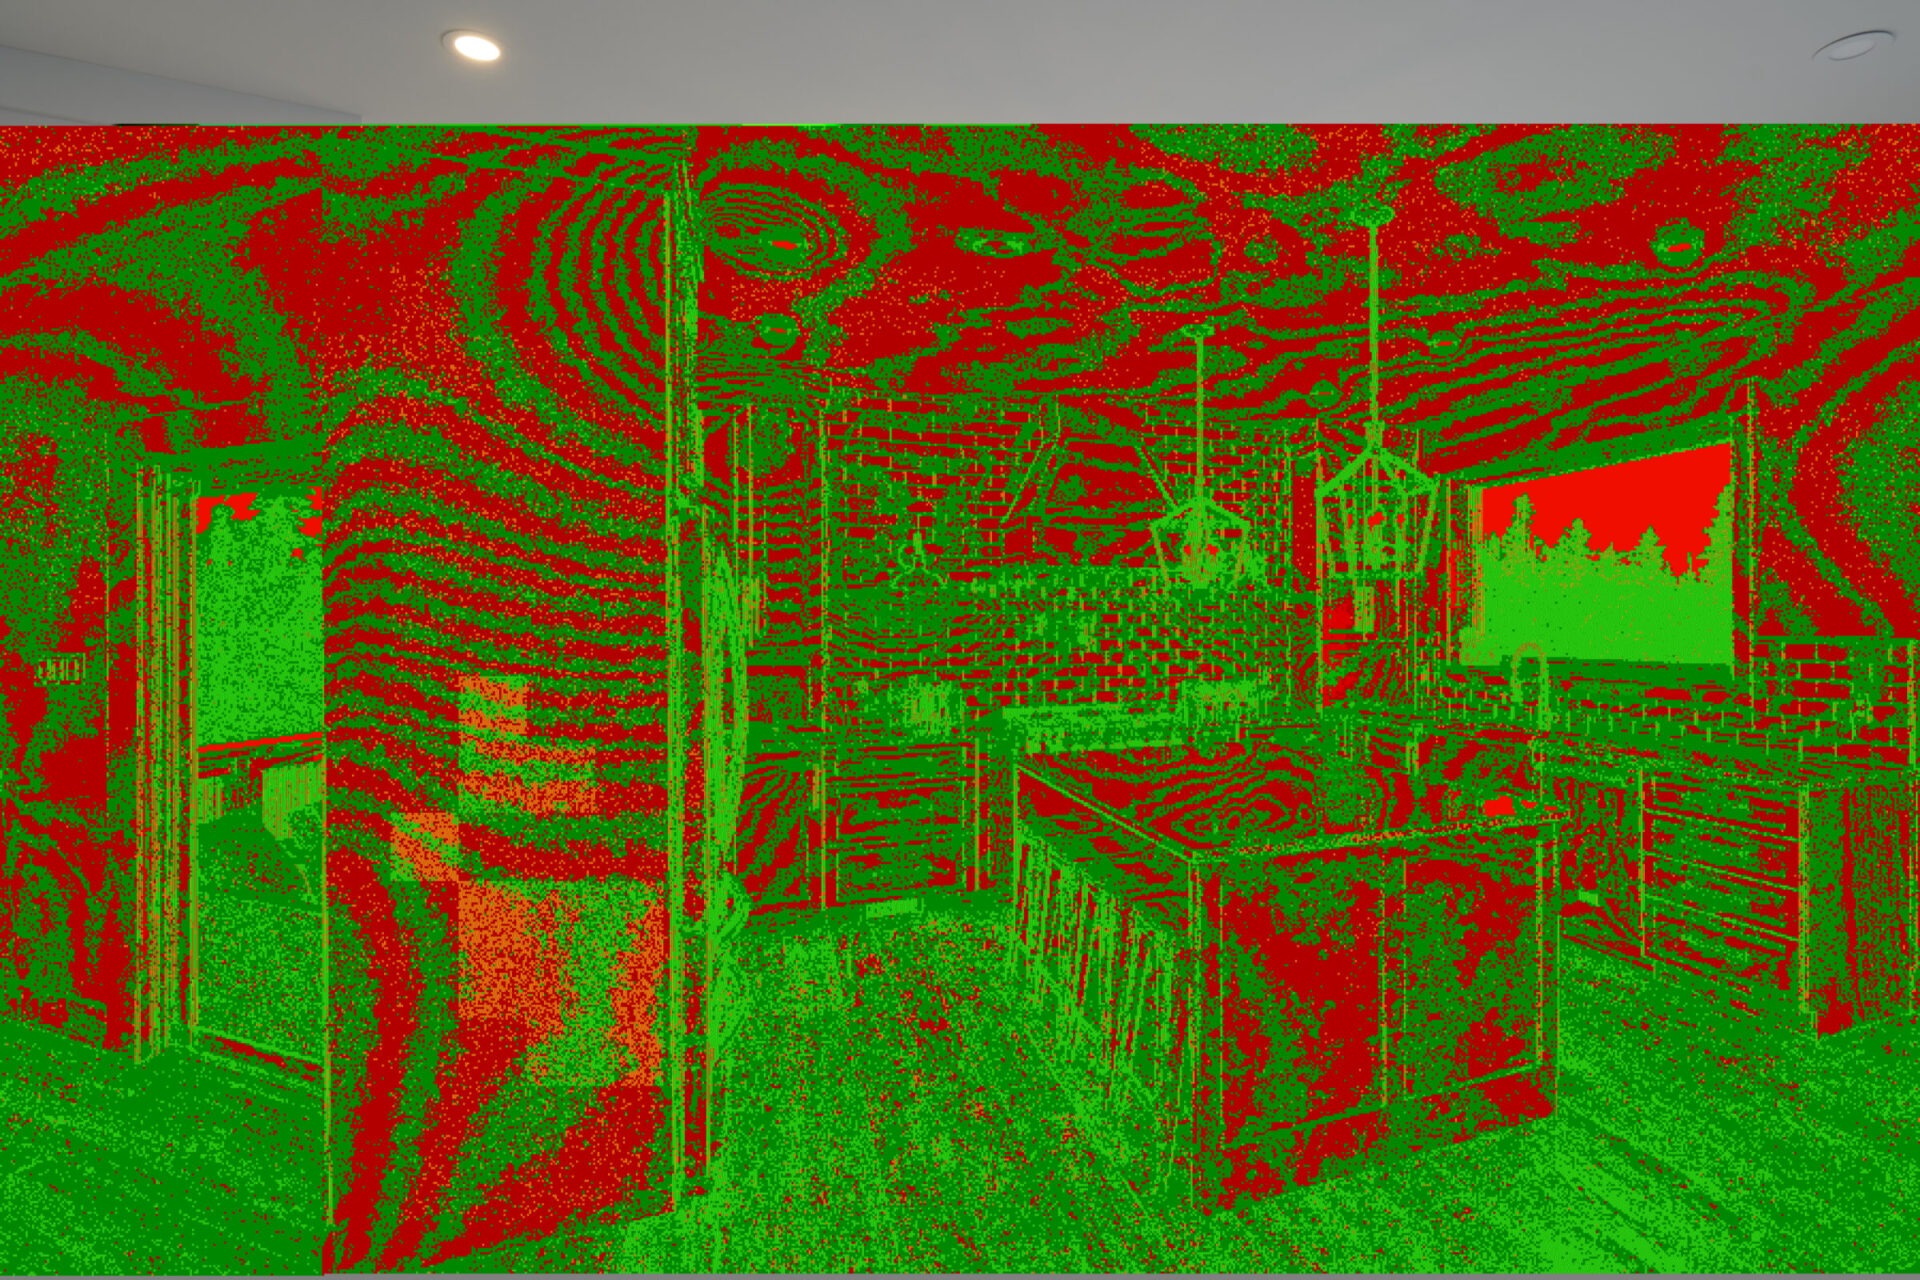 This image shows a room with distorted, vivid red and green colors creating a psychedelic or infrared-like visual effect on the interior setting.